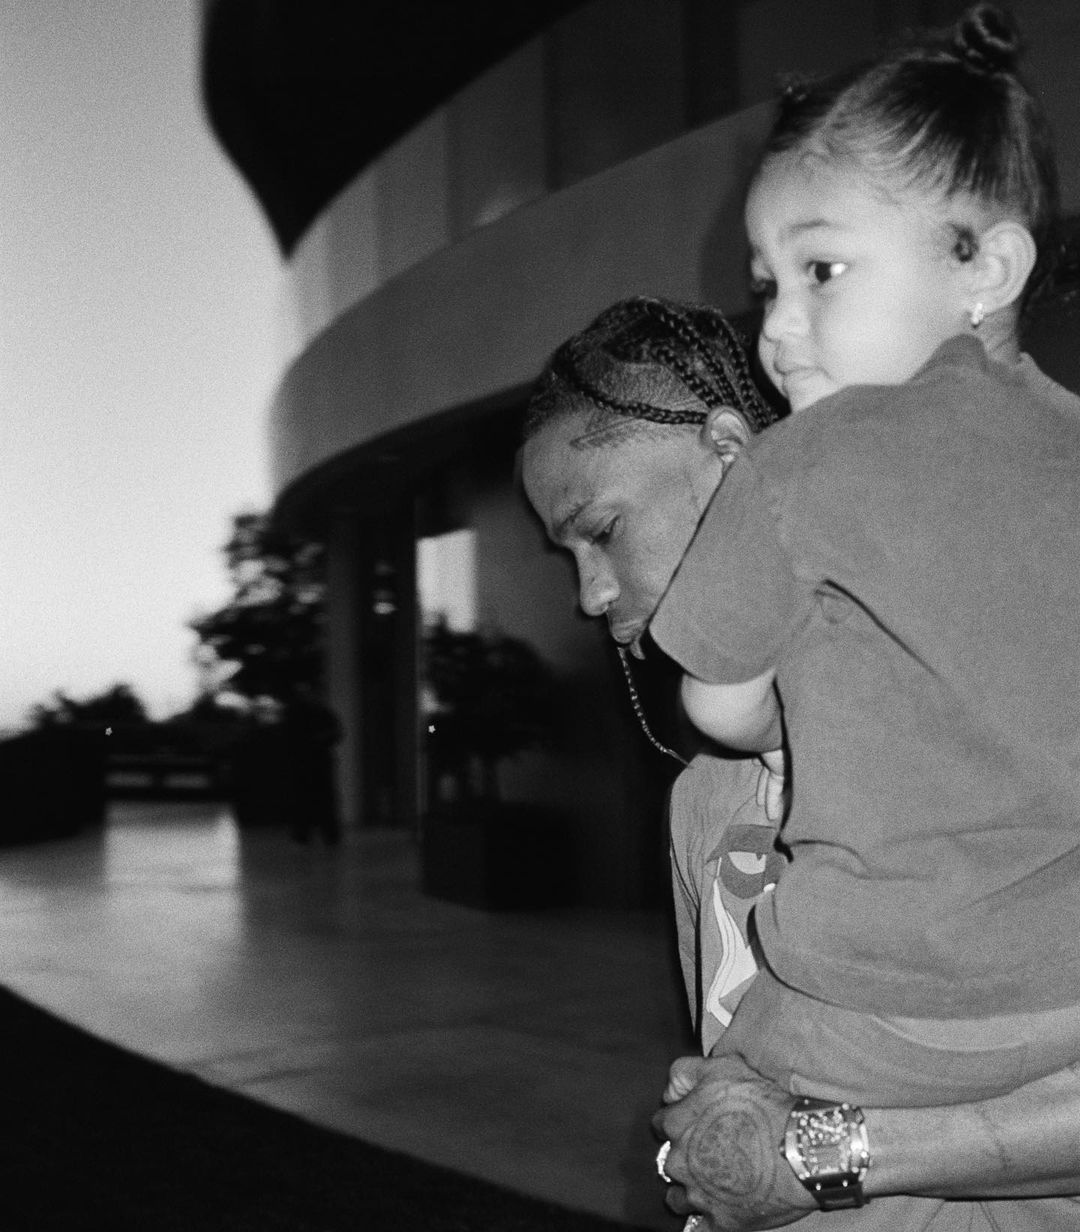 Travis Scott Wrote His Daughter A Sweet Poem For Her Birthday